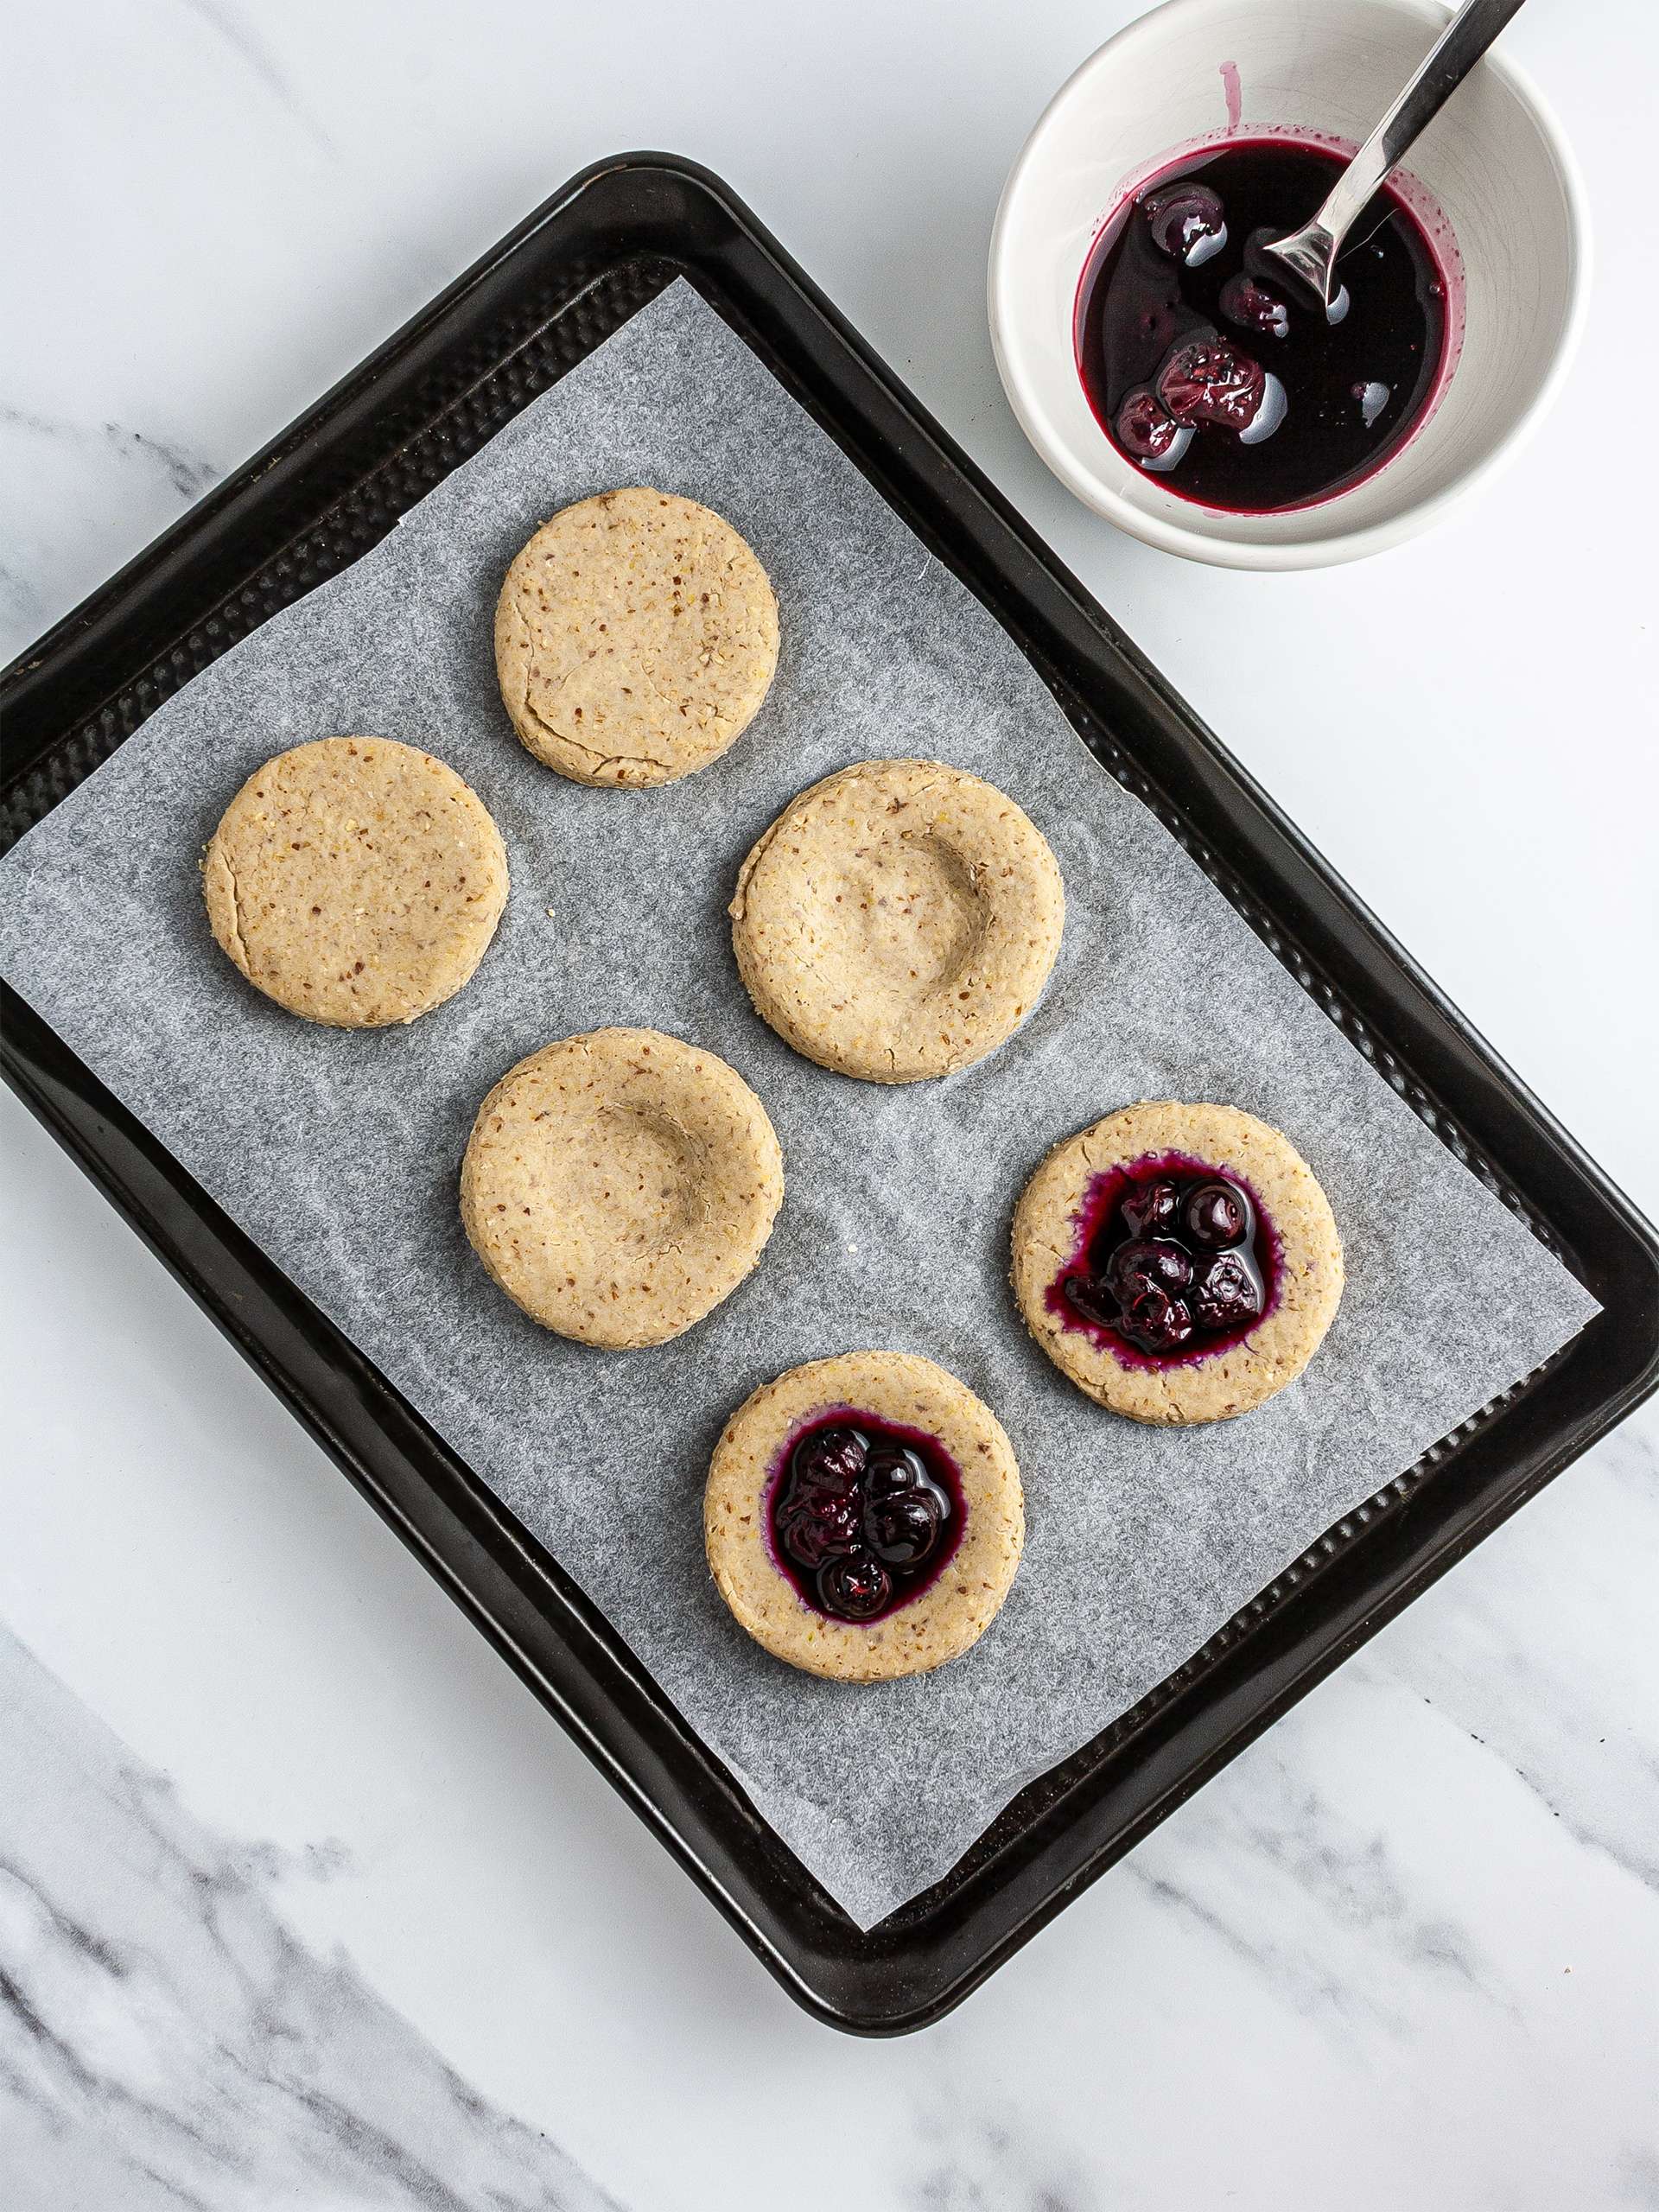 Kolaches with blueberry compote filling